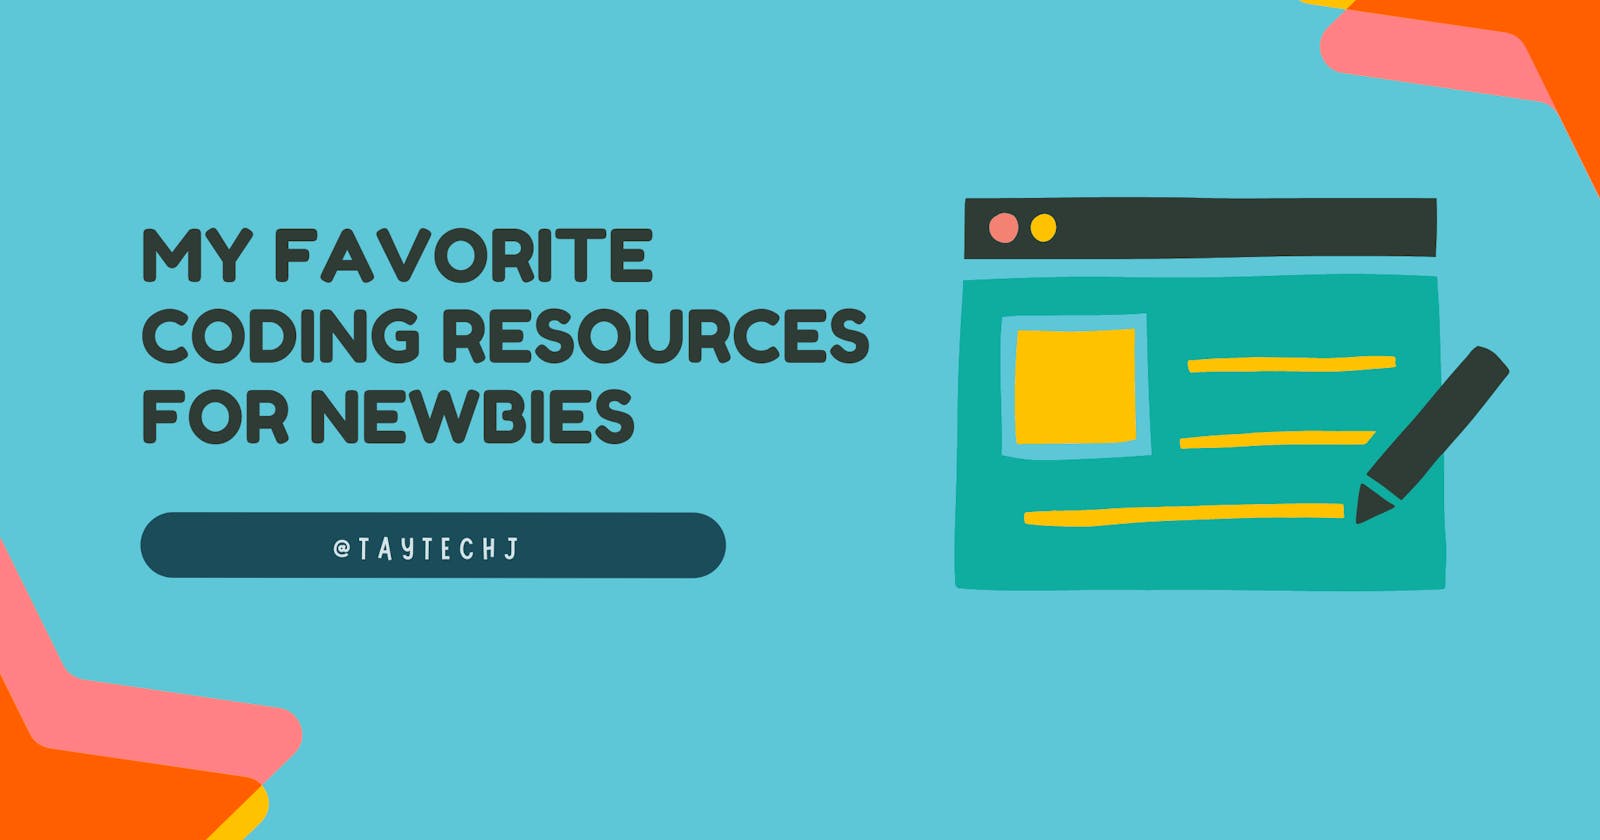 My favorite coding resources for newbies